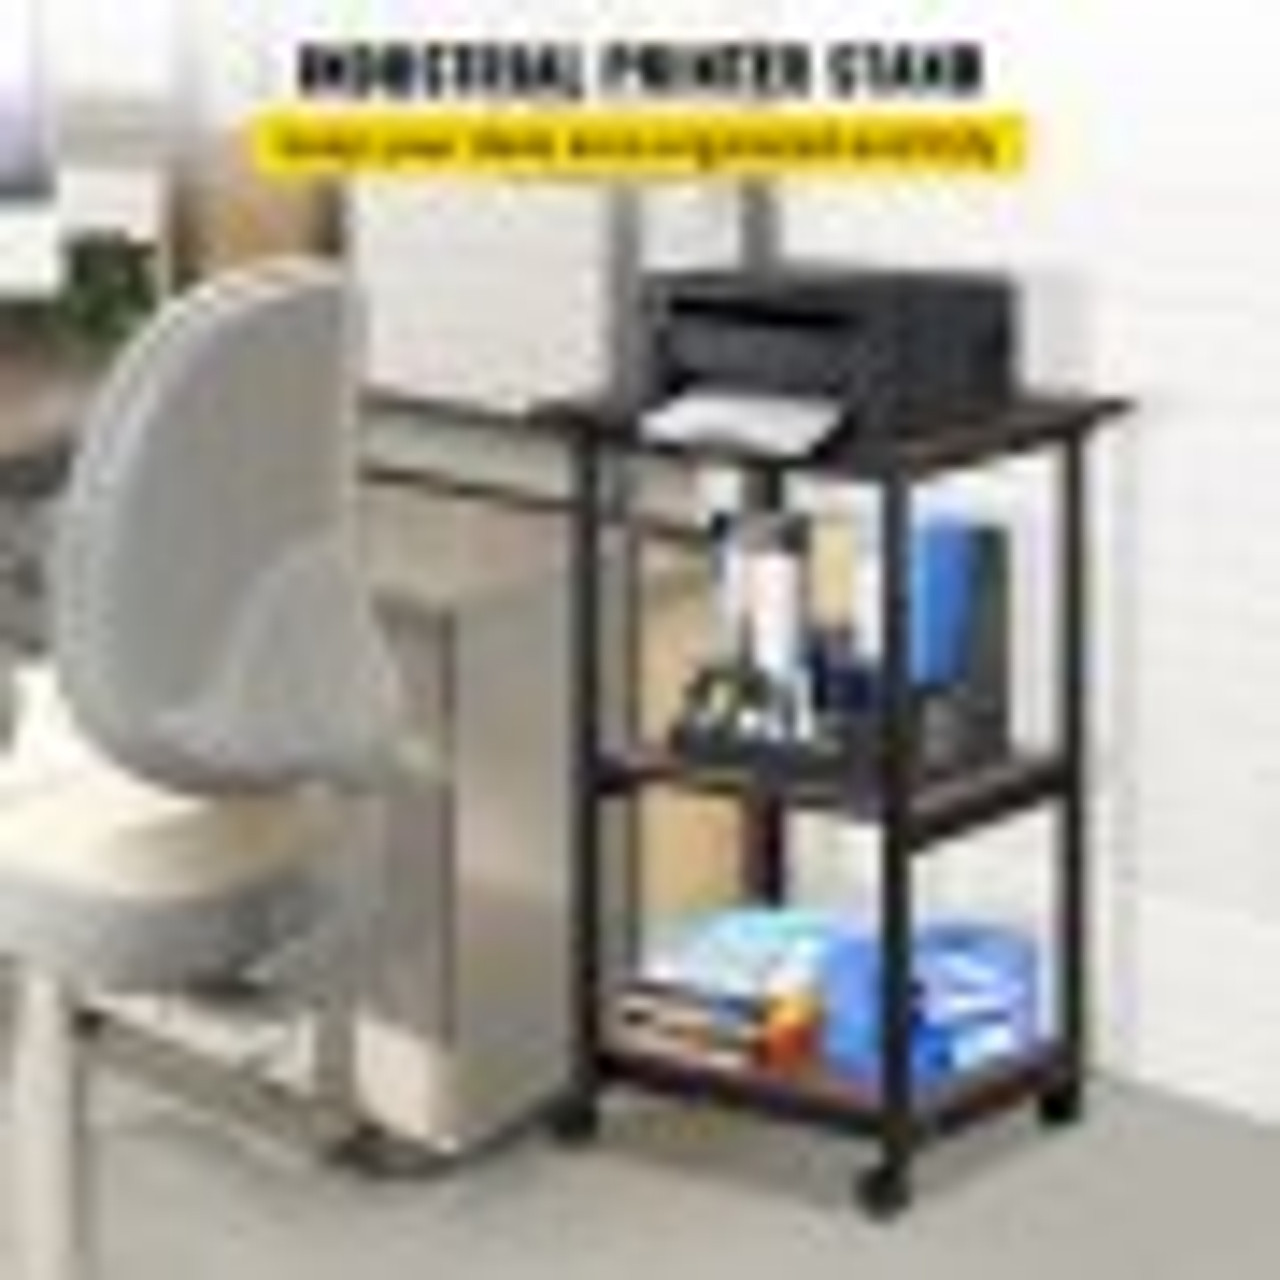 Printer Stand, 3 Tiers, Rolling Machine Cart with Adjustable Shelf & Lockable Wheels, Mobile Printer Table for Fax Scanner File Book in Home Office, Black & Brown